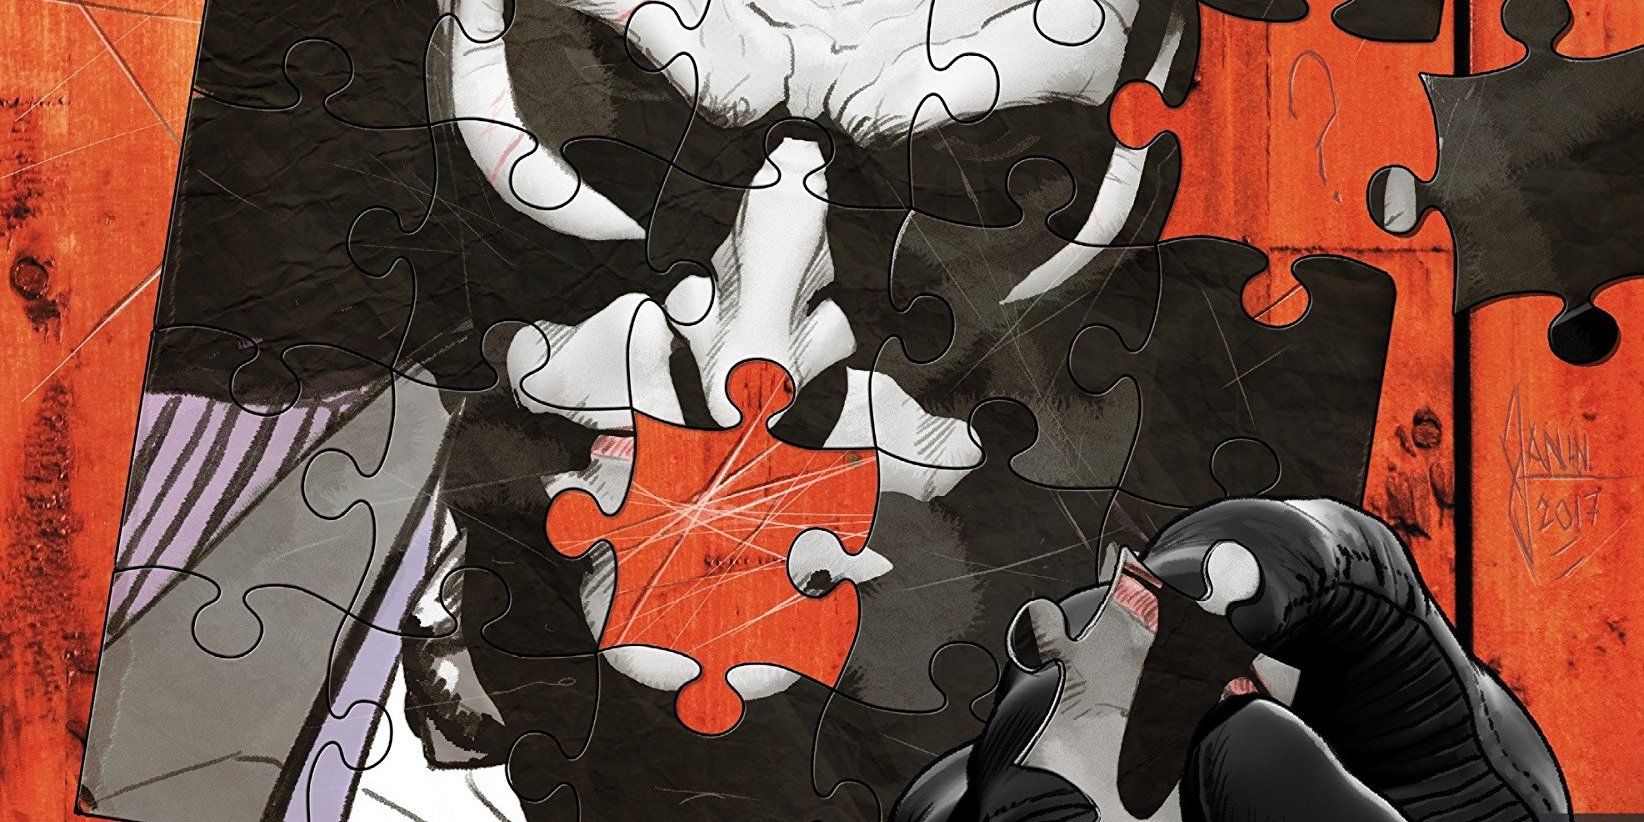 Batman's fingers holding a puzzle piece over an unfinished jigsaw puzzle of The Joker's face on a cover of The War of Jokes and Riddles comic series.